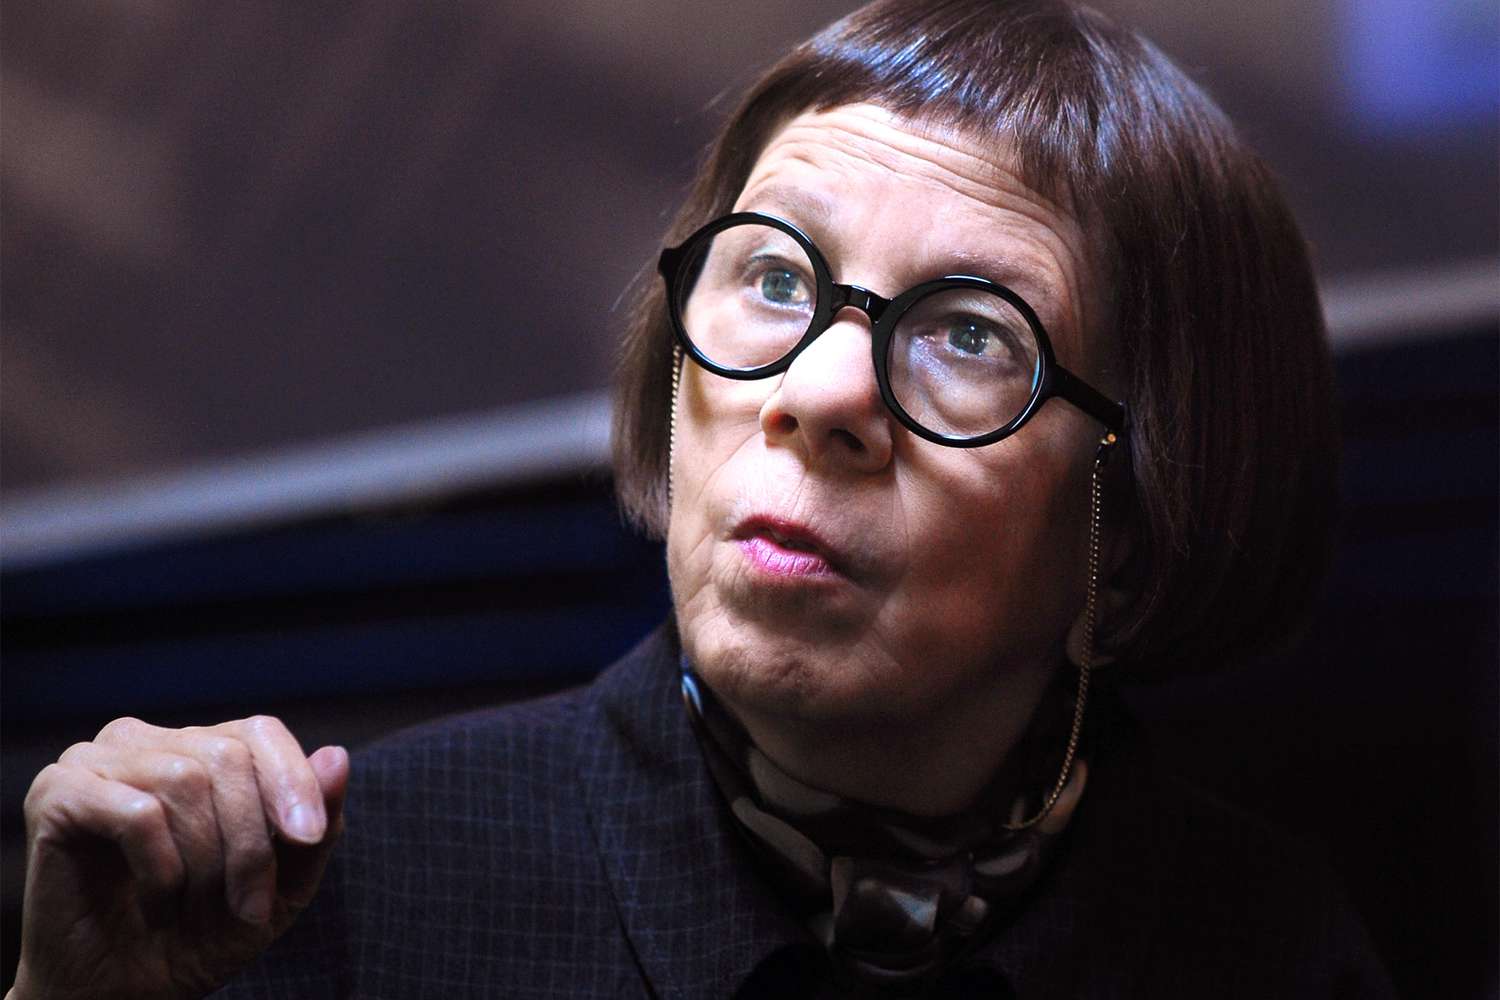 &quot;Killshot&quot; -- Hetty Lange (Linda Hunt) investigates the killing of a scientist who is killed by a sniper while jet-skiing on NCIS: LOS ANGELES, Tuesday, October 20 (9:00-10:00 PM ET/PT) on the CBS Television Network. Photo: Ron P. Jaffe/CBS ©2009 CBS Broadcasting Inc. All Rights Reserved.